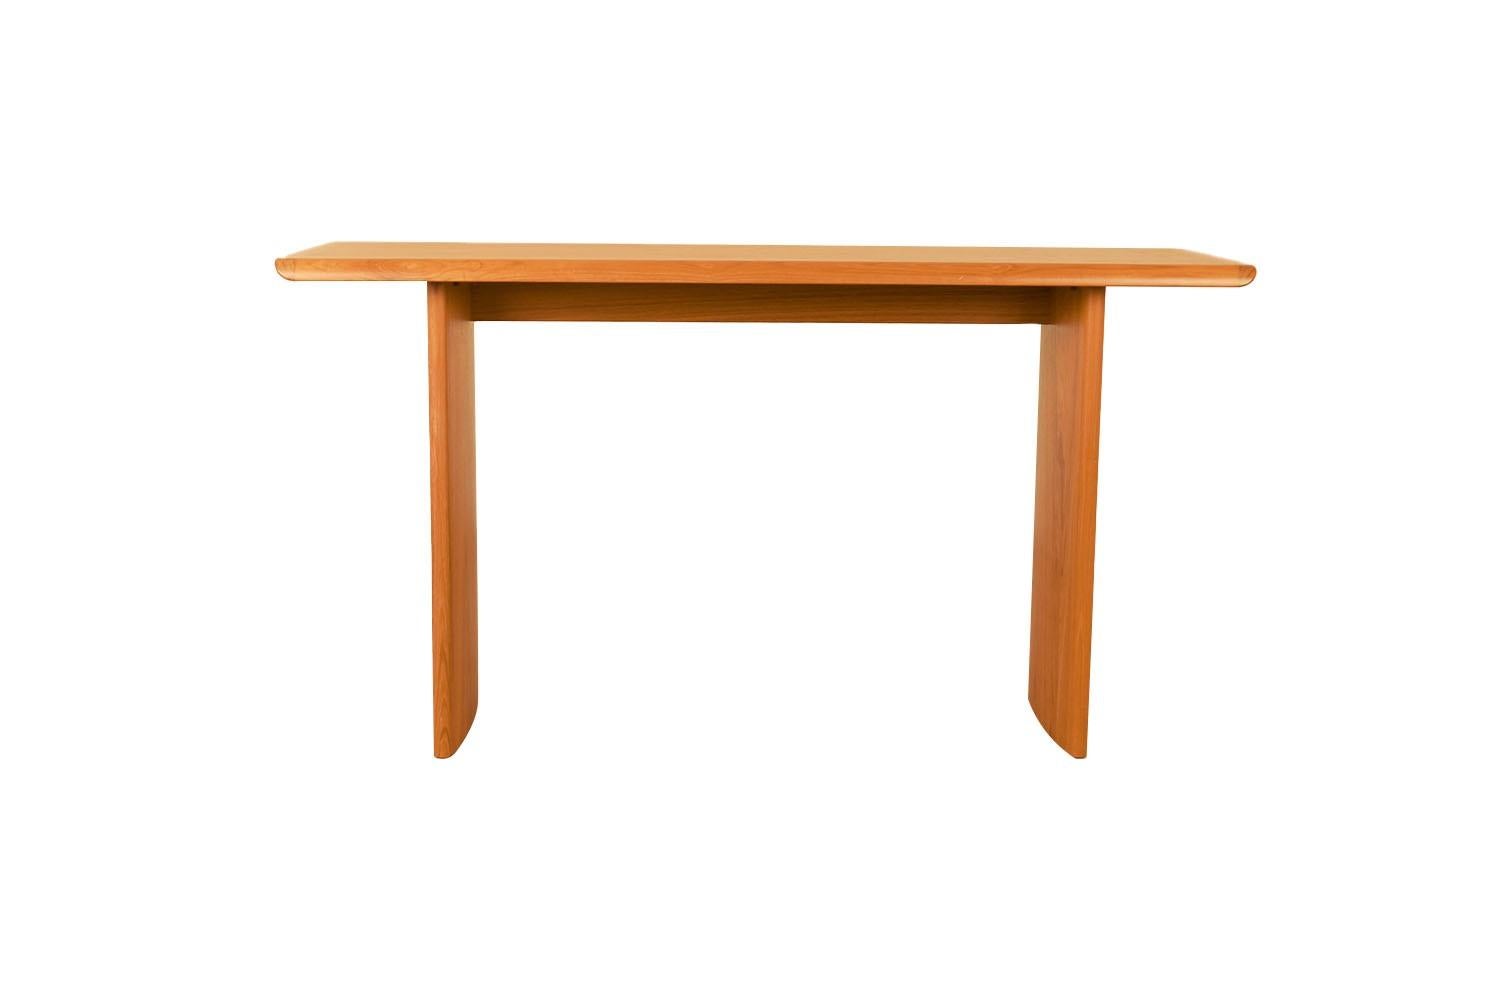 A handsome, sleek Danish Modern teak console, sofa table. Featuring a beautifully grained rectangular table top resting on a recessed sculpted base, creating a “floating” effect. Elegantly curved legs complete the clean, sleek profile. Finely